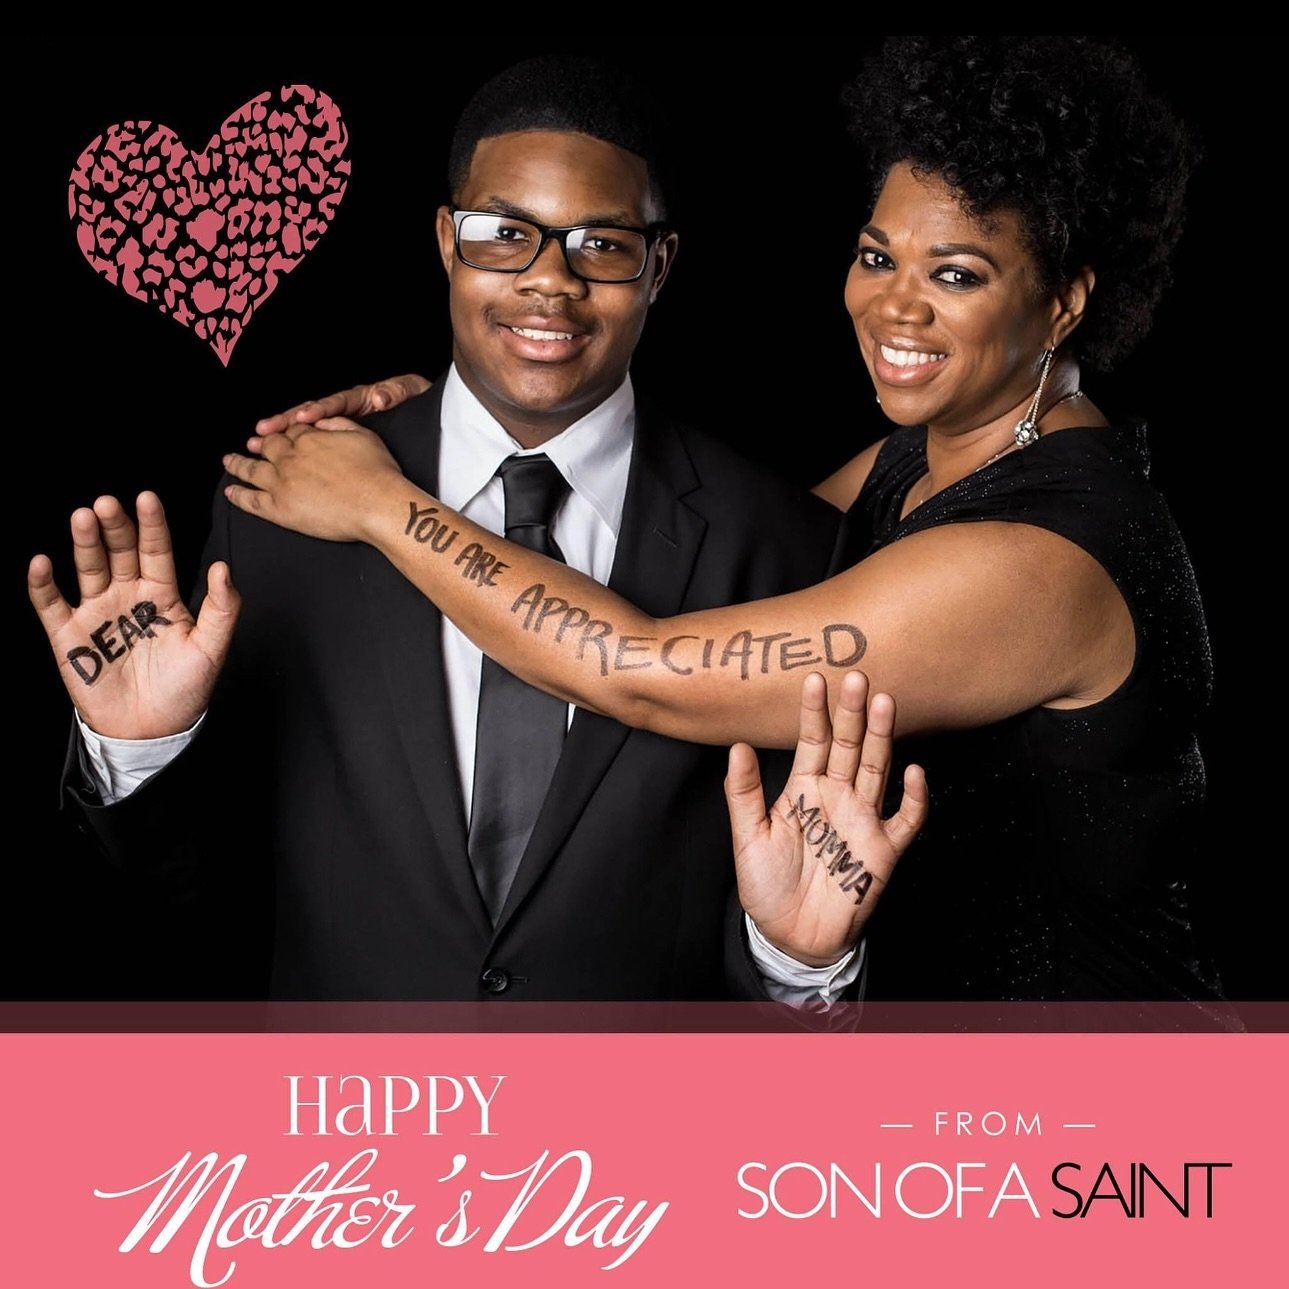 This photo, taken in 2017, features Trey, a Son of a Saint graduate, and his mother Toni. Since it&rsquo;s Mother&rsquo;s Day, we thought we would repost this memory.